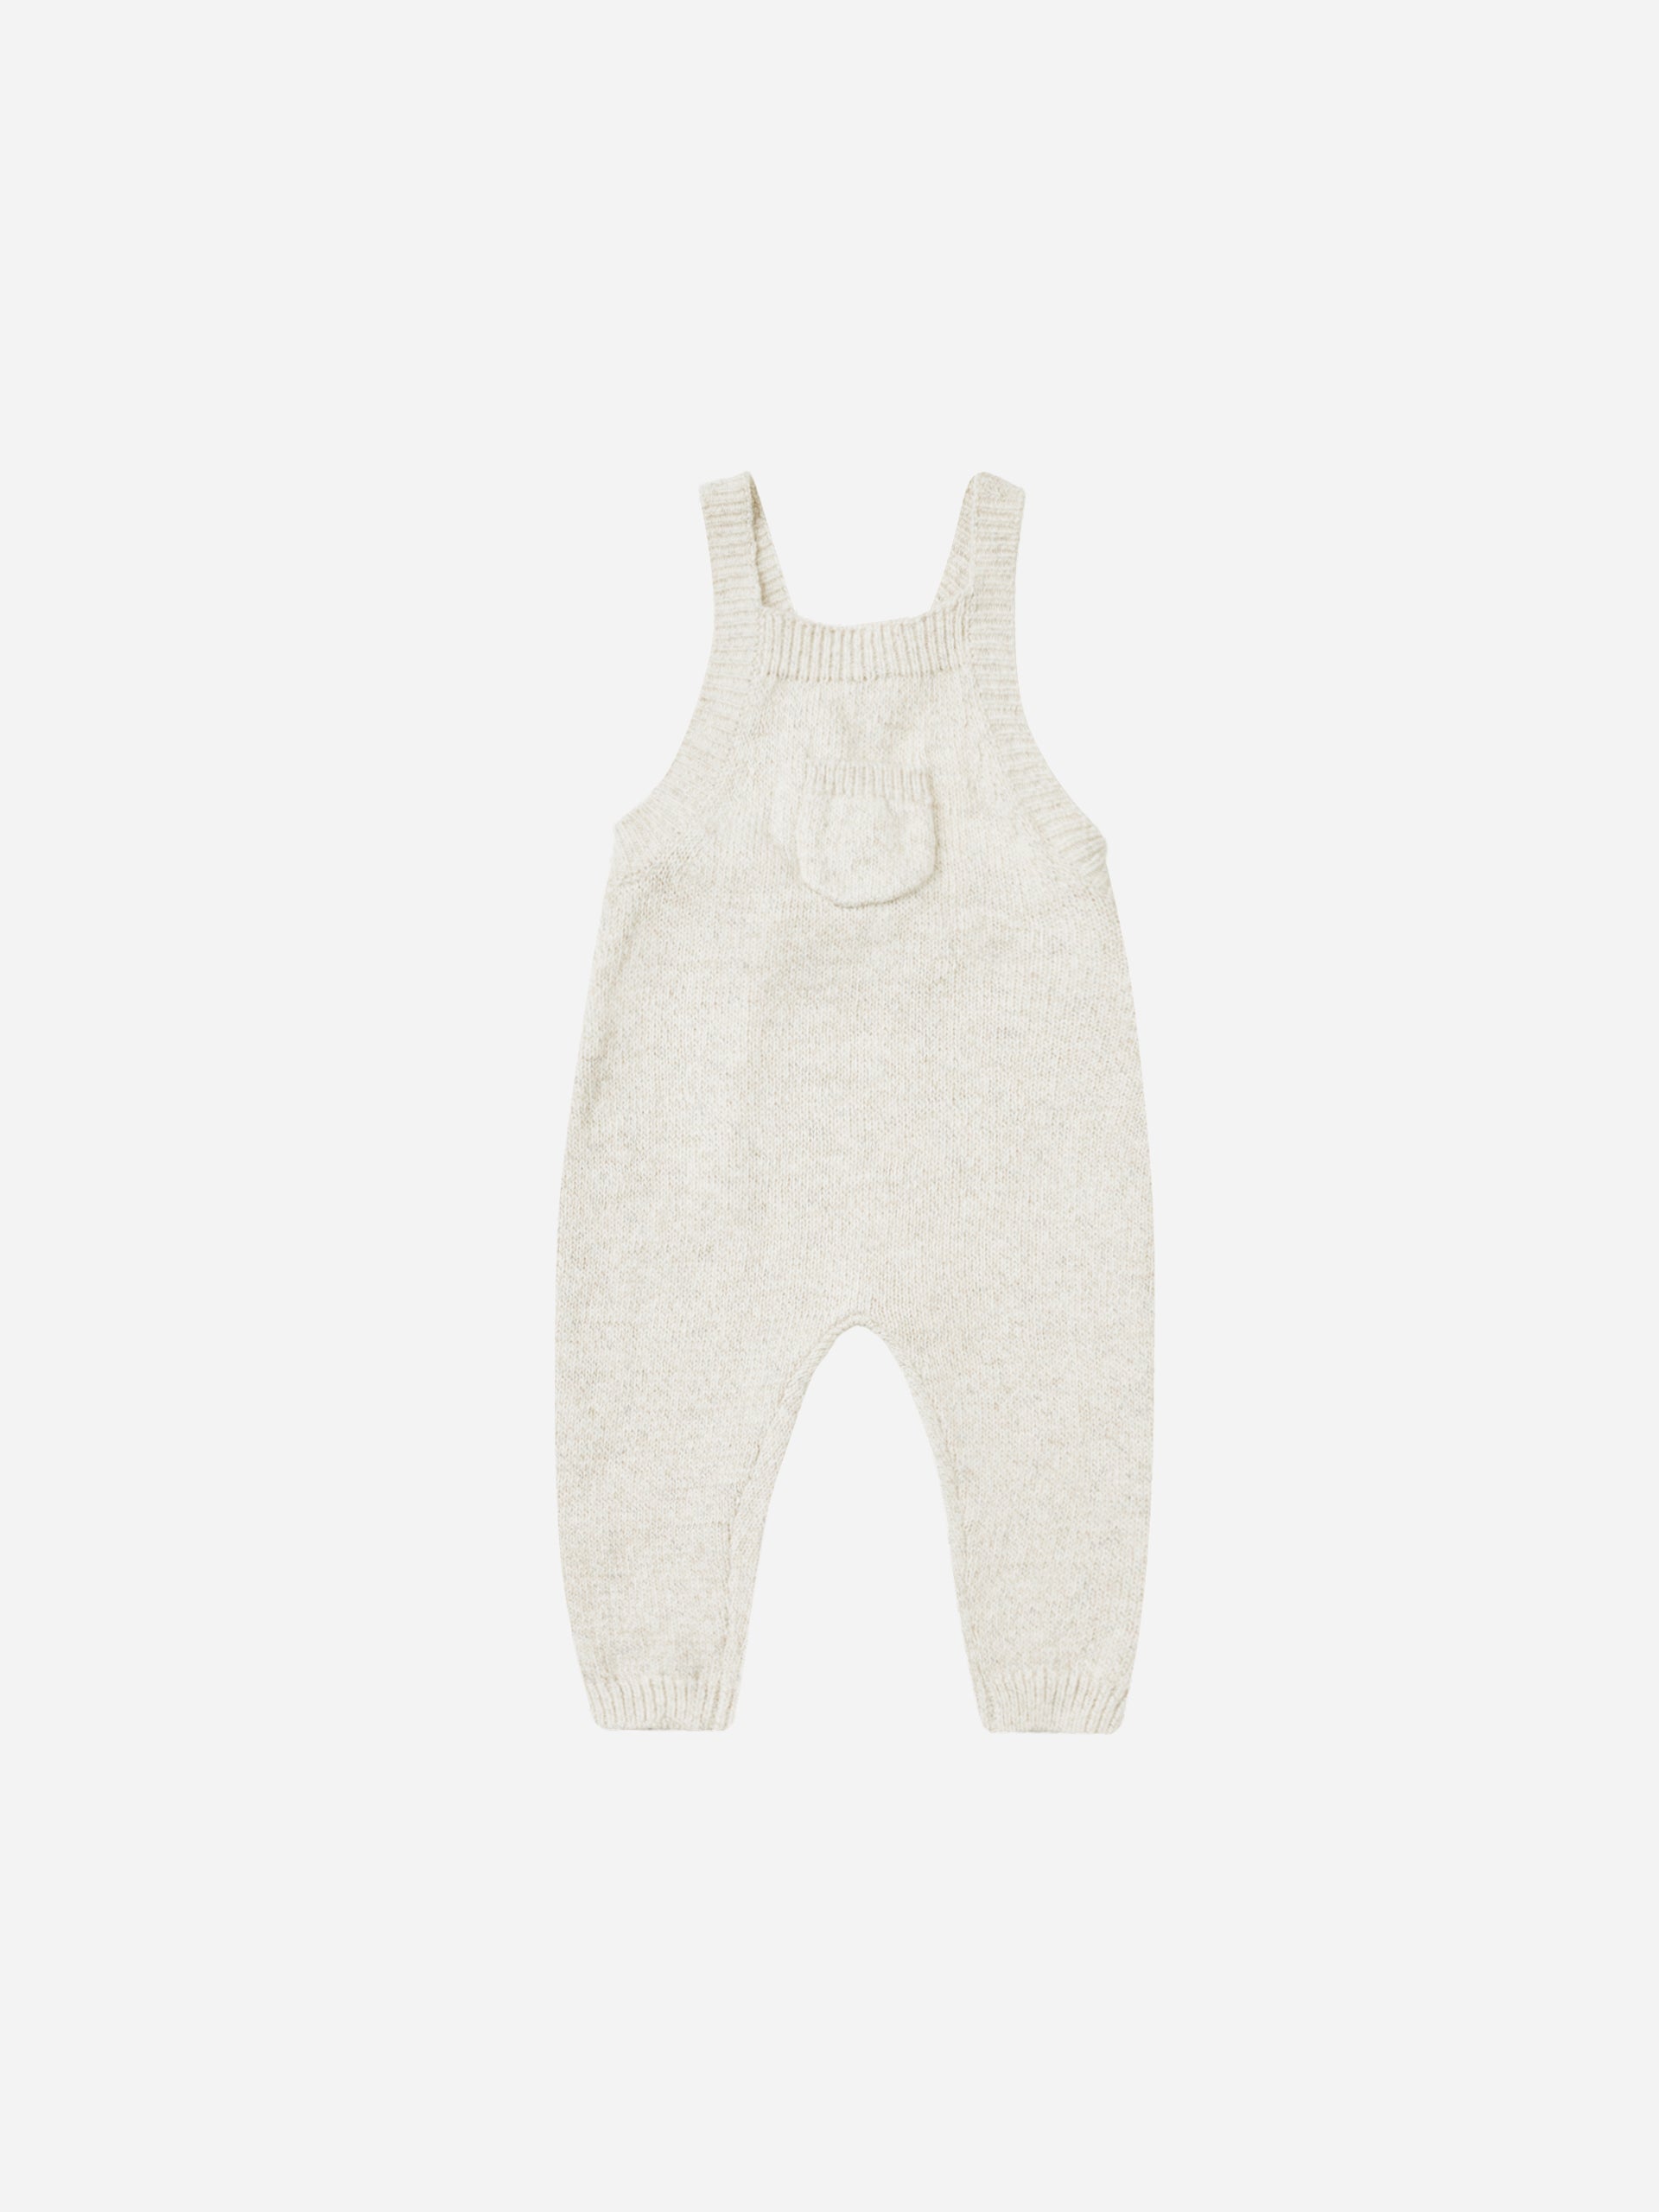 Knit Overalls || Ivory – Quincy Mae